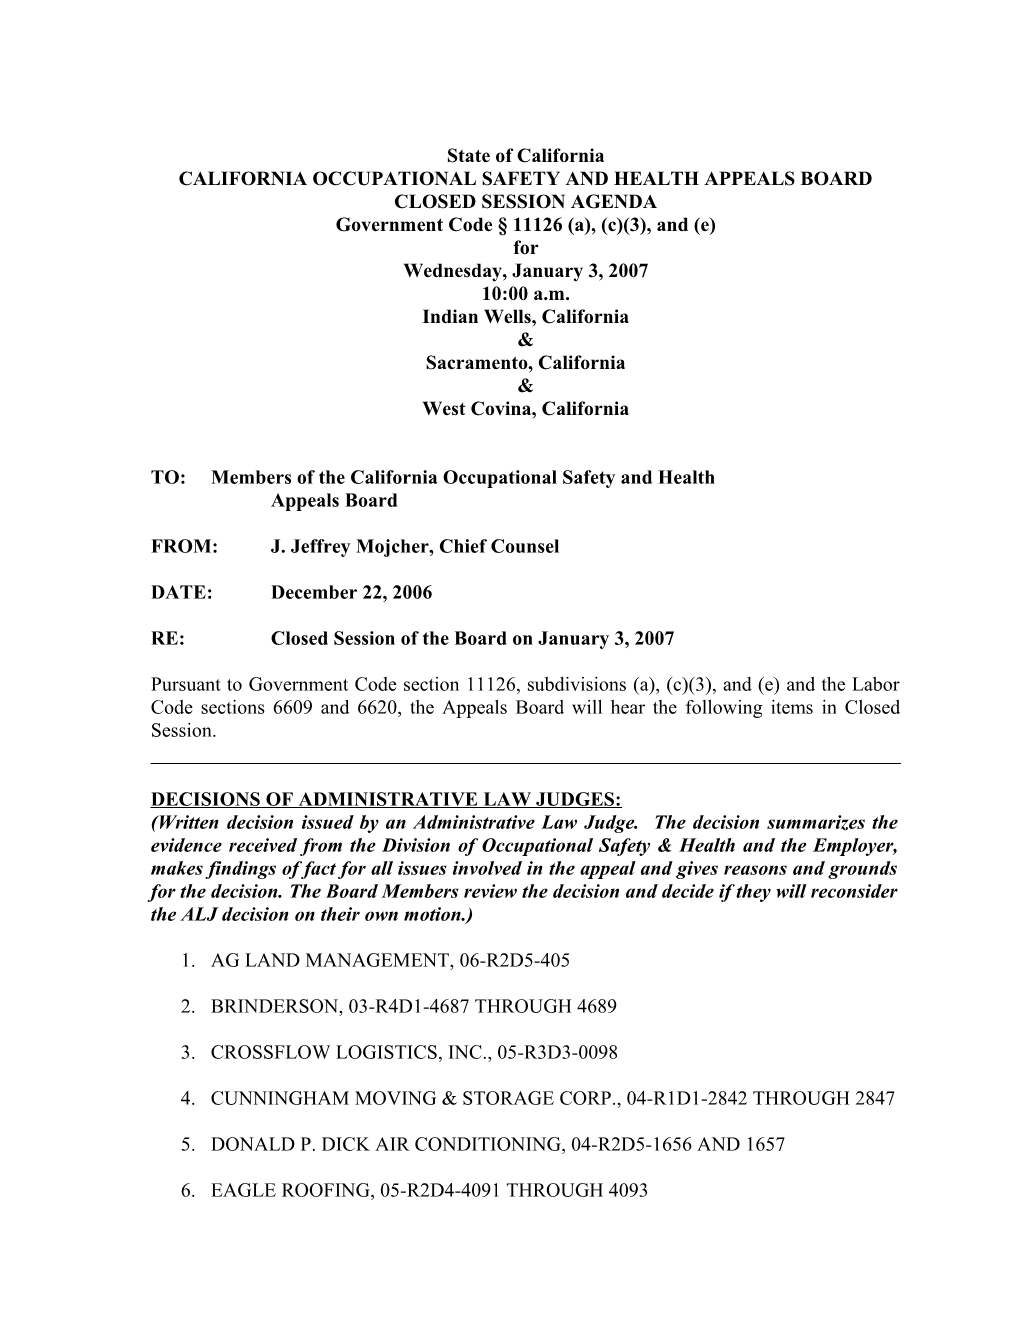 California Occupational Safety & Health Appeals Board